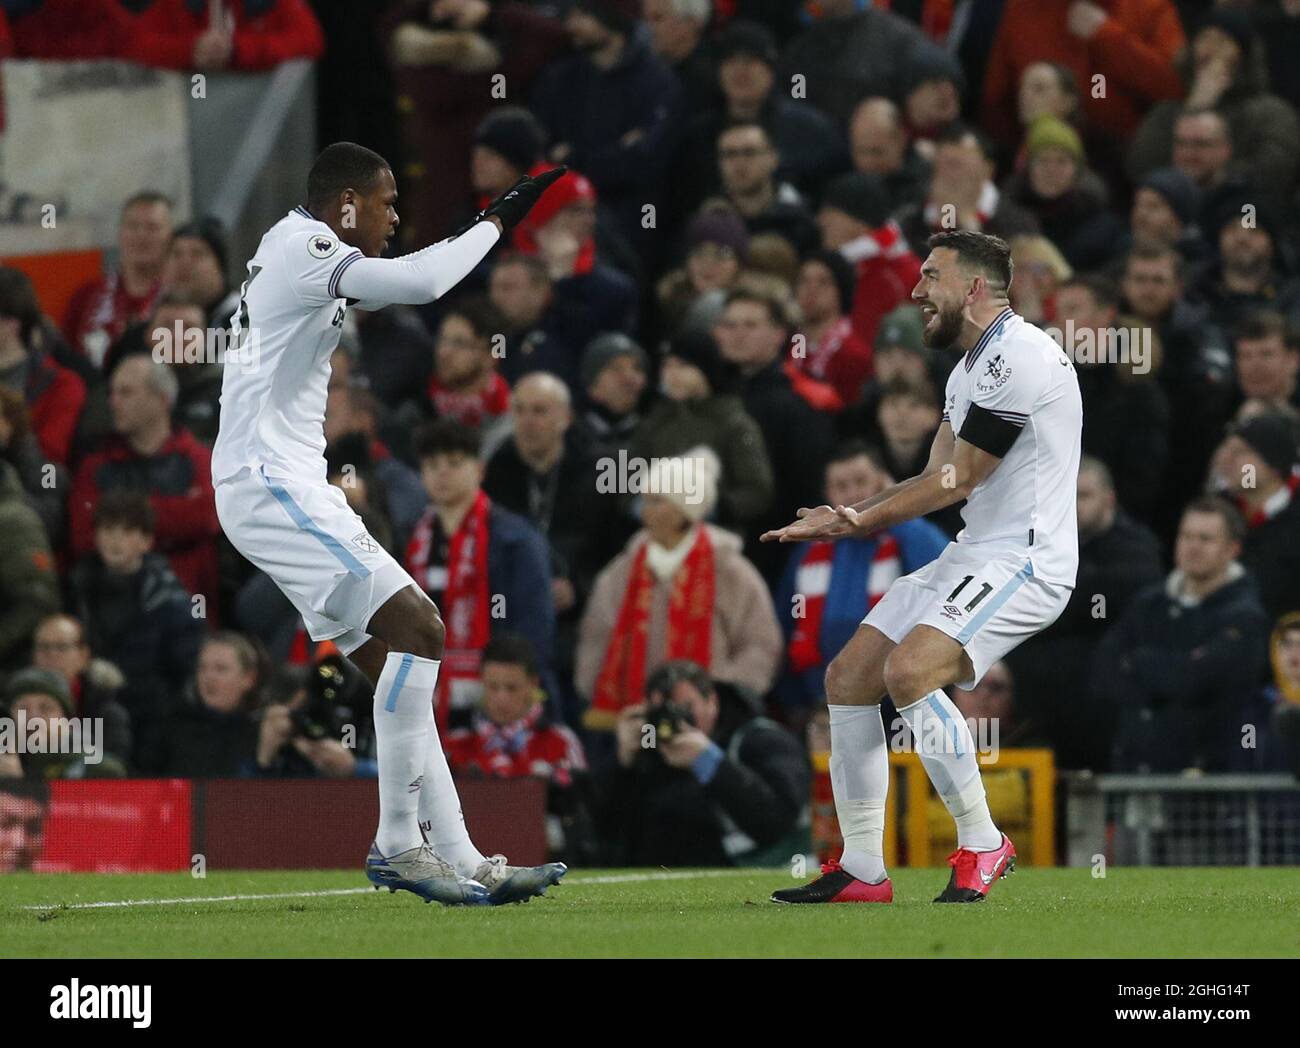 Issa Diop of West Ham United (l) celebrates scoring the equaliser with Robert Snodgrass of West Ham United  during the Premier League match at Anfield, Liverpool. Picture date: 24th February 2020. Picture credit should read: Darren Staples/Sportimage via PA Images Stock Photo